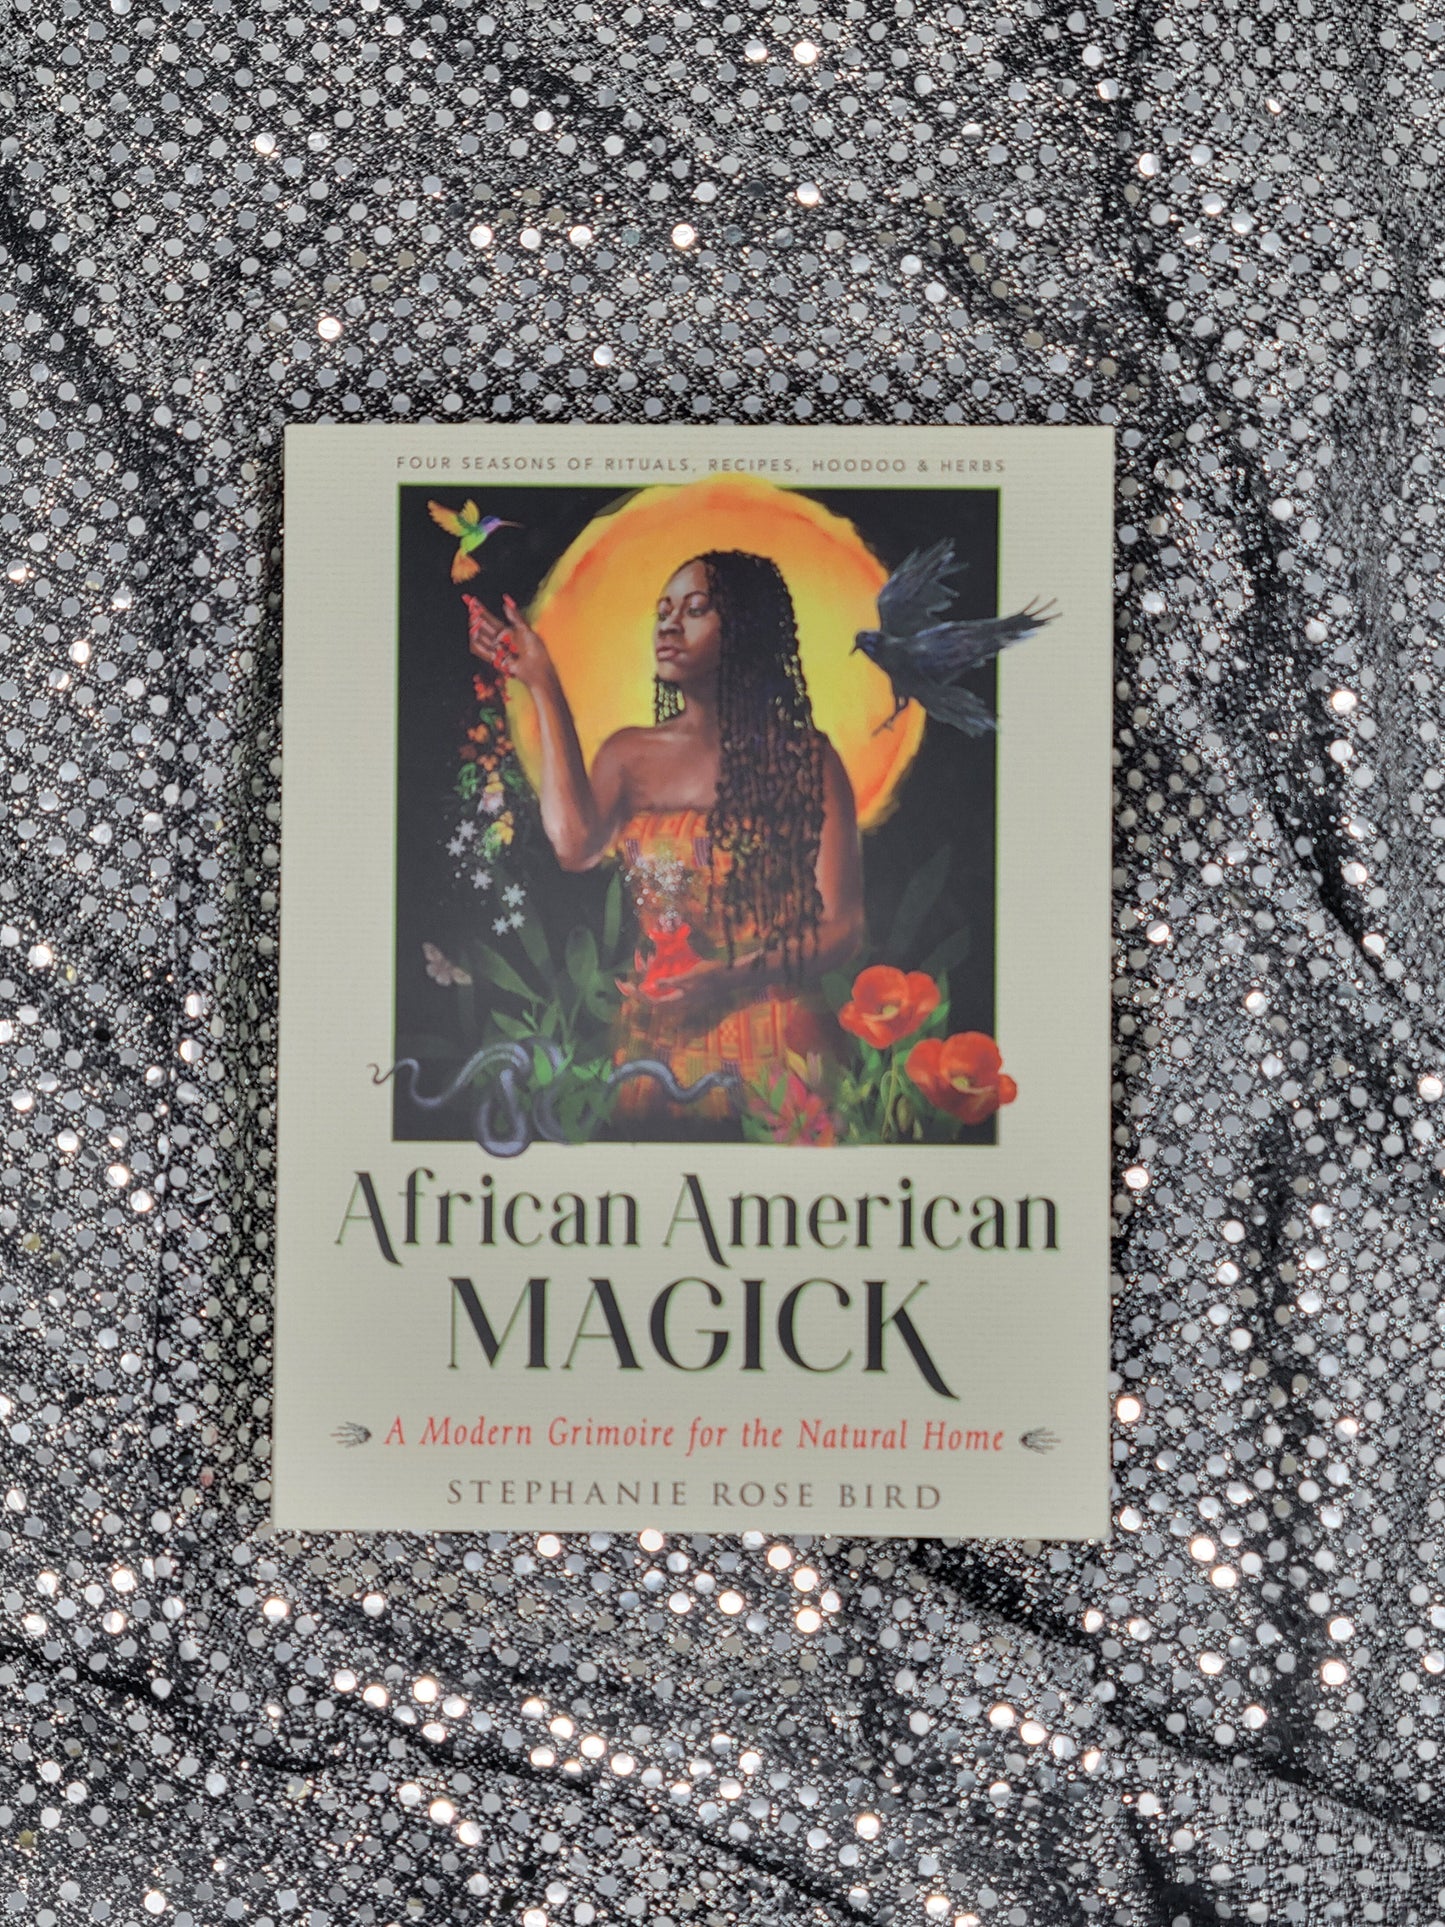 African American Magick A Modern Grimoire for the Natural Home (Four Seasons of Rituals, Recipes, Hoodoo & Herbs) - Stephanie Rose Bird